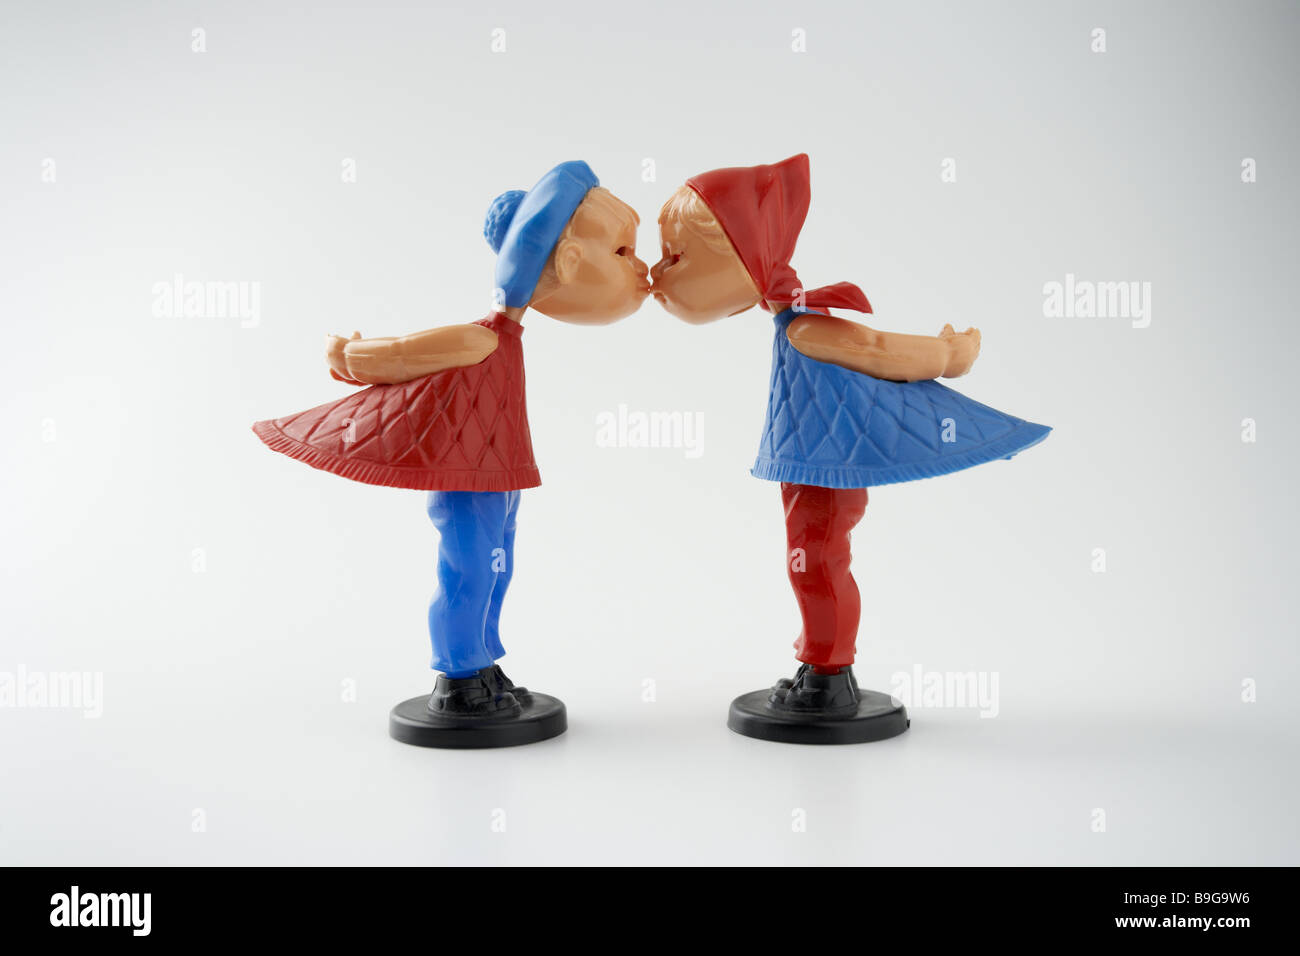 Attraction attraction relationship figures harmony boy children concept plastic kiss kiss-dolls kisses love caress magnetically Stock Photo